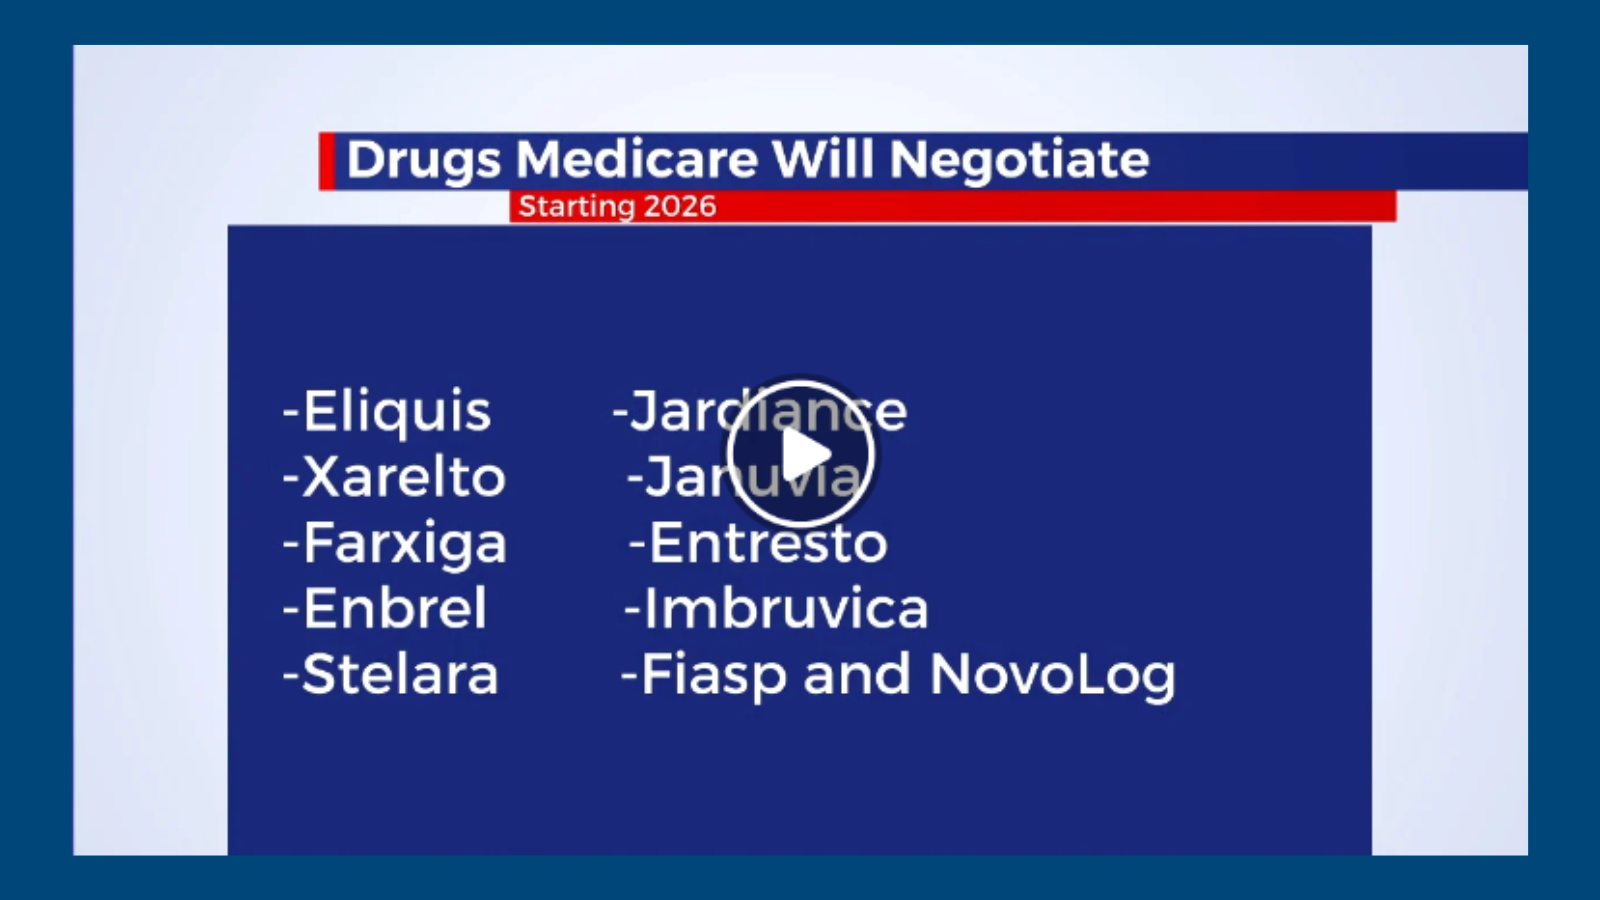 Video link with list of drugs for which CMS will begin negotiating lower prices